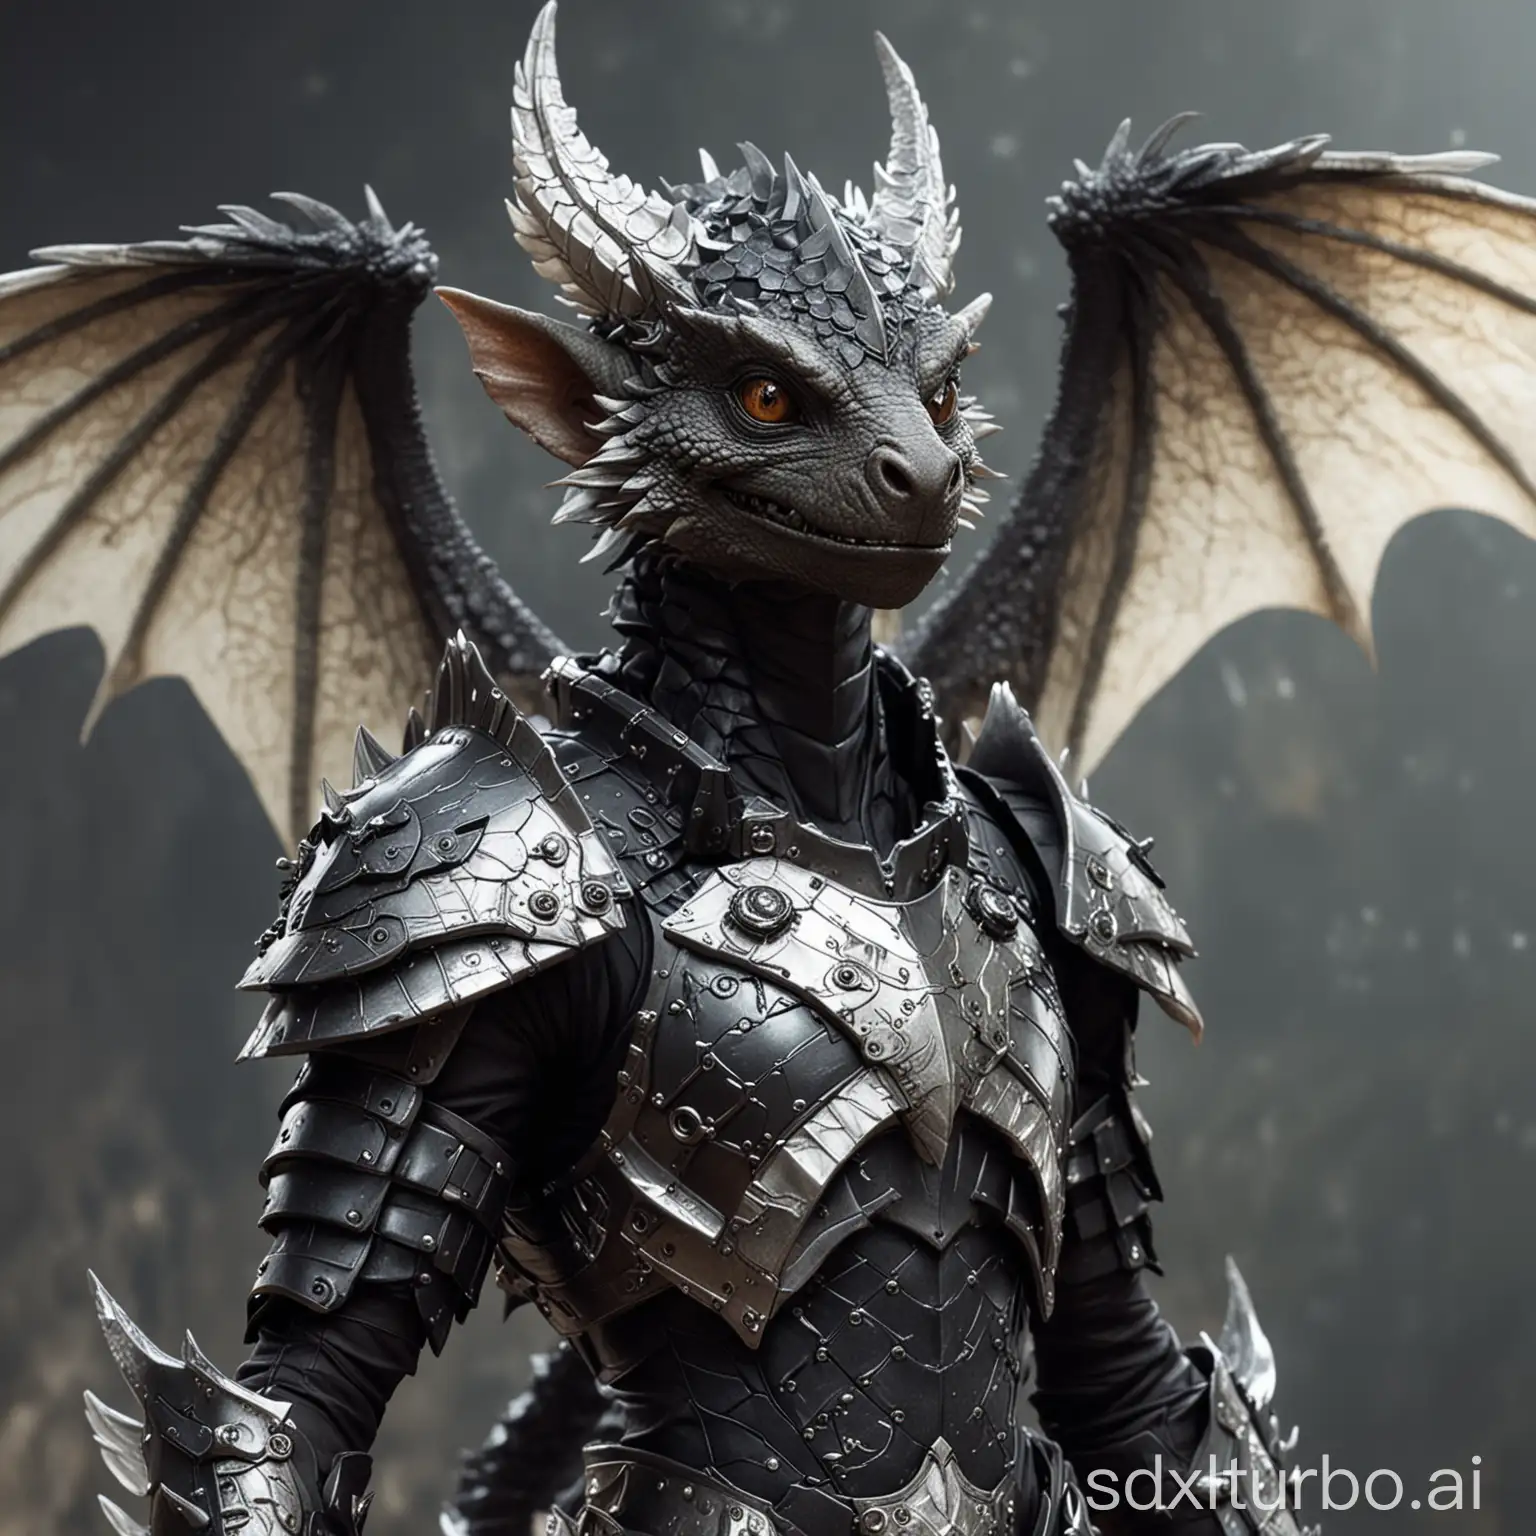 a kobold with silver scales and wings, wearing black sci-fi armor